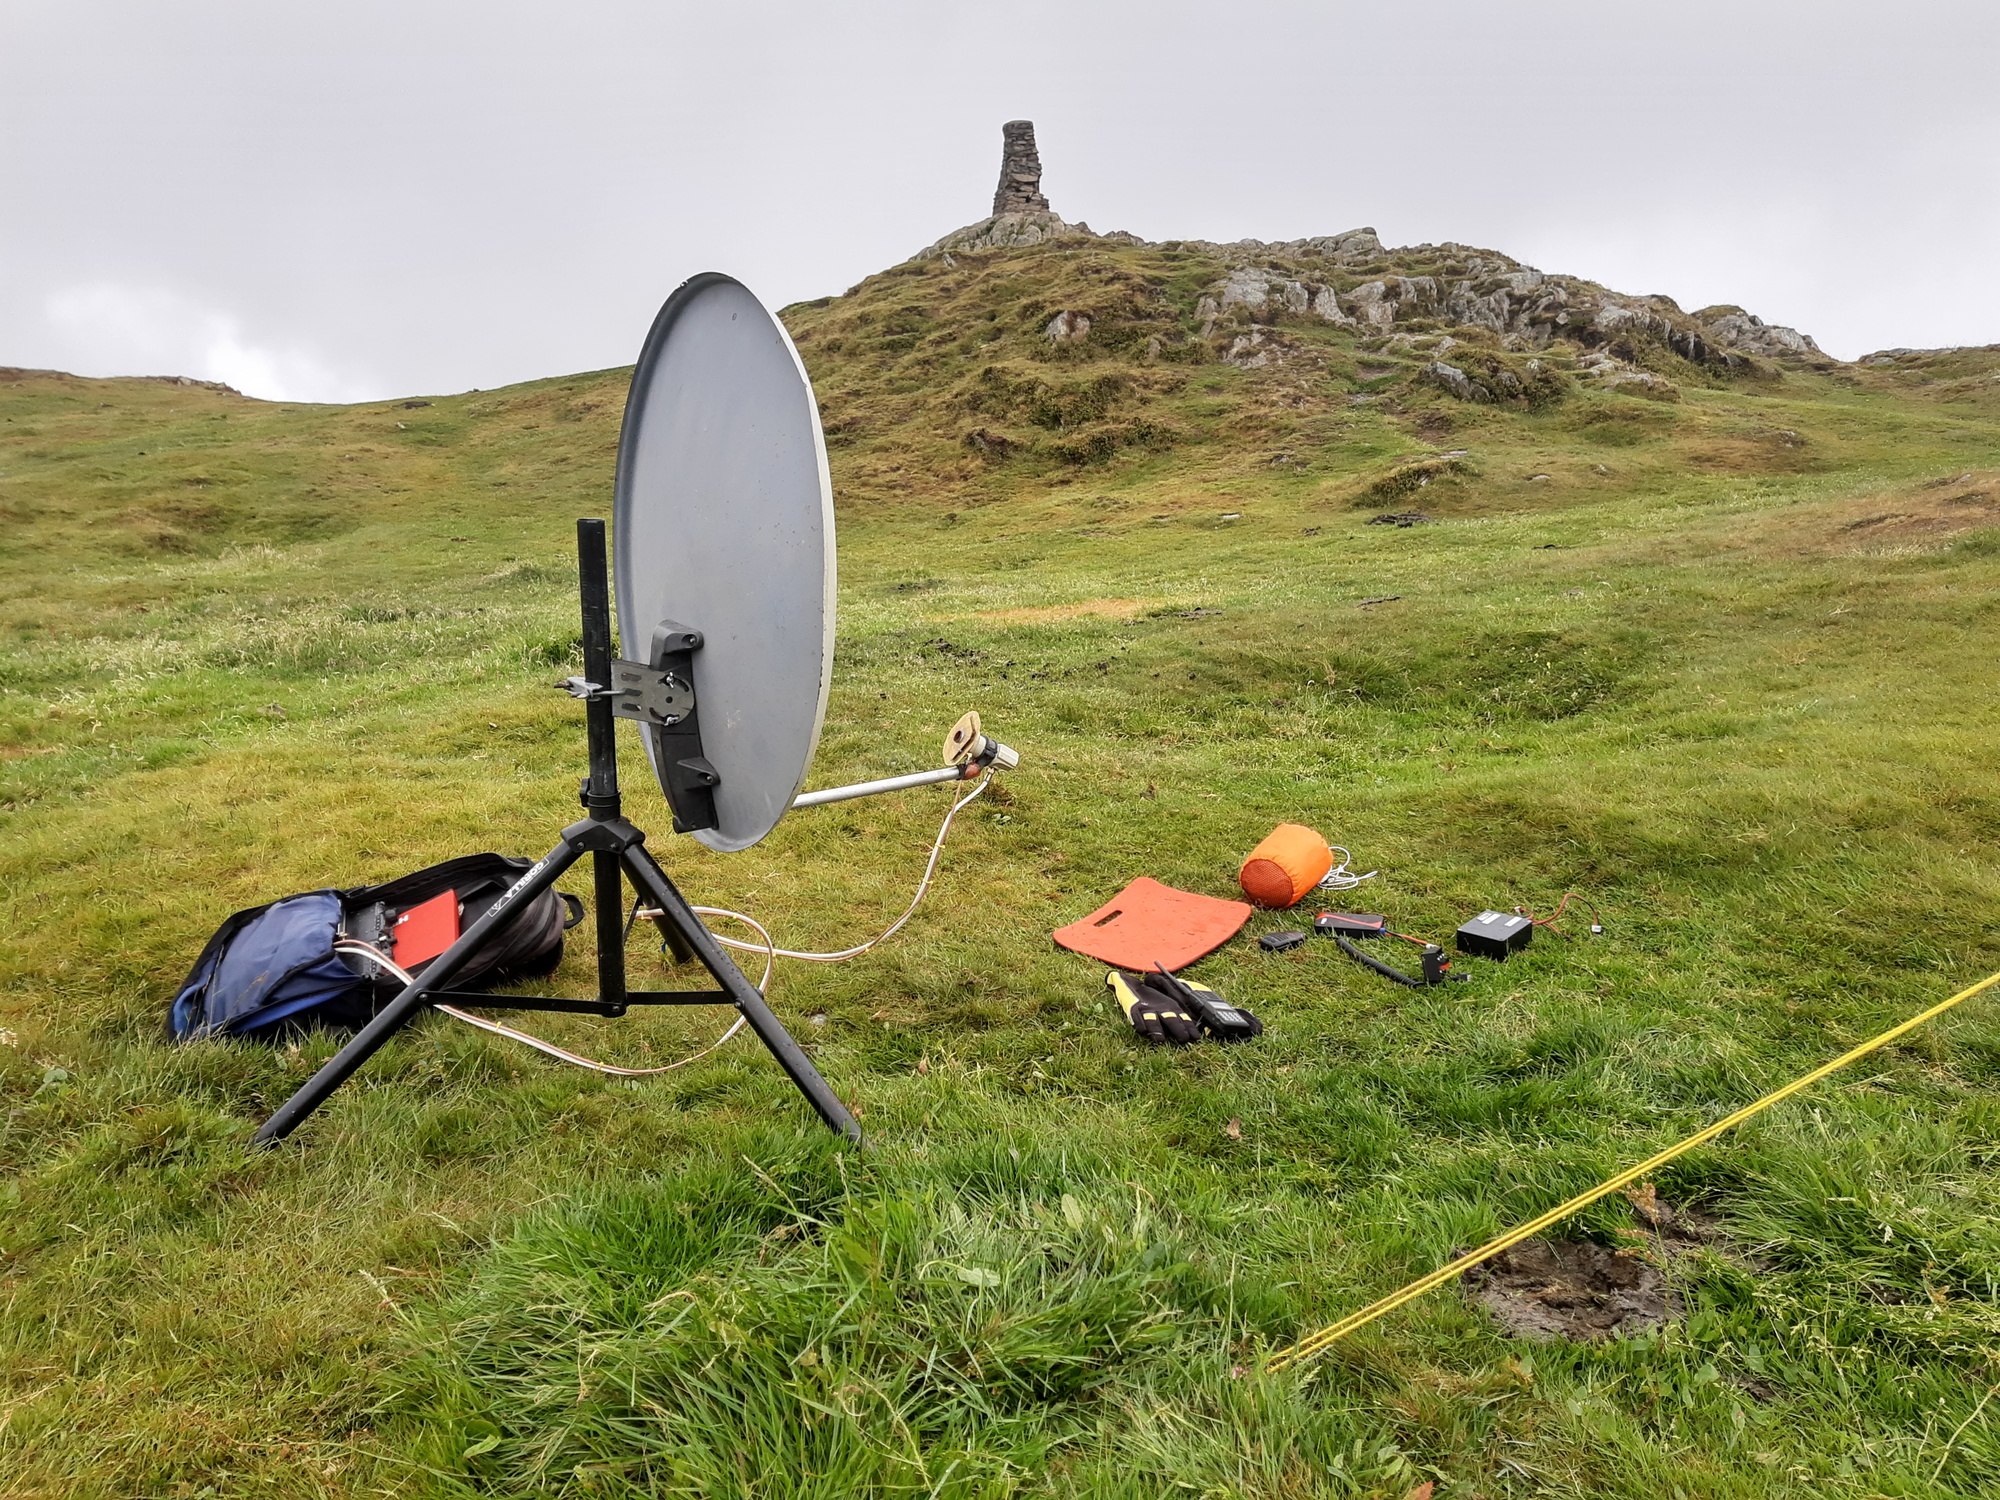 QO-100 S2S - #41 by G0HIK - Activation Reports - SOTA Reflector